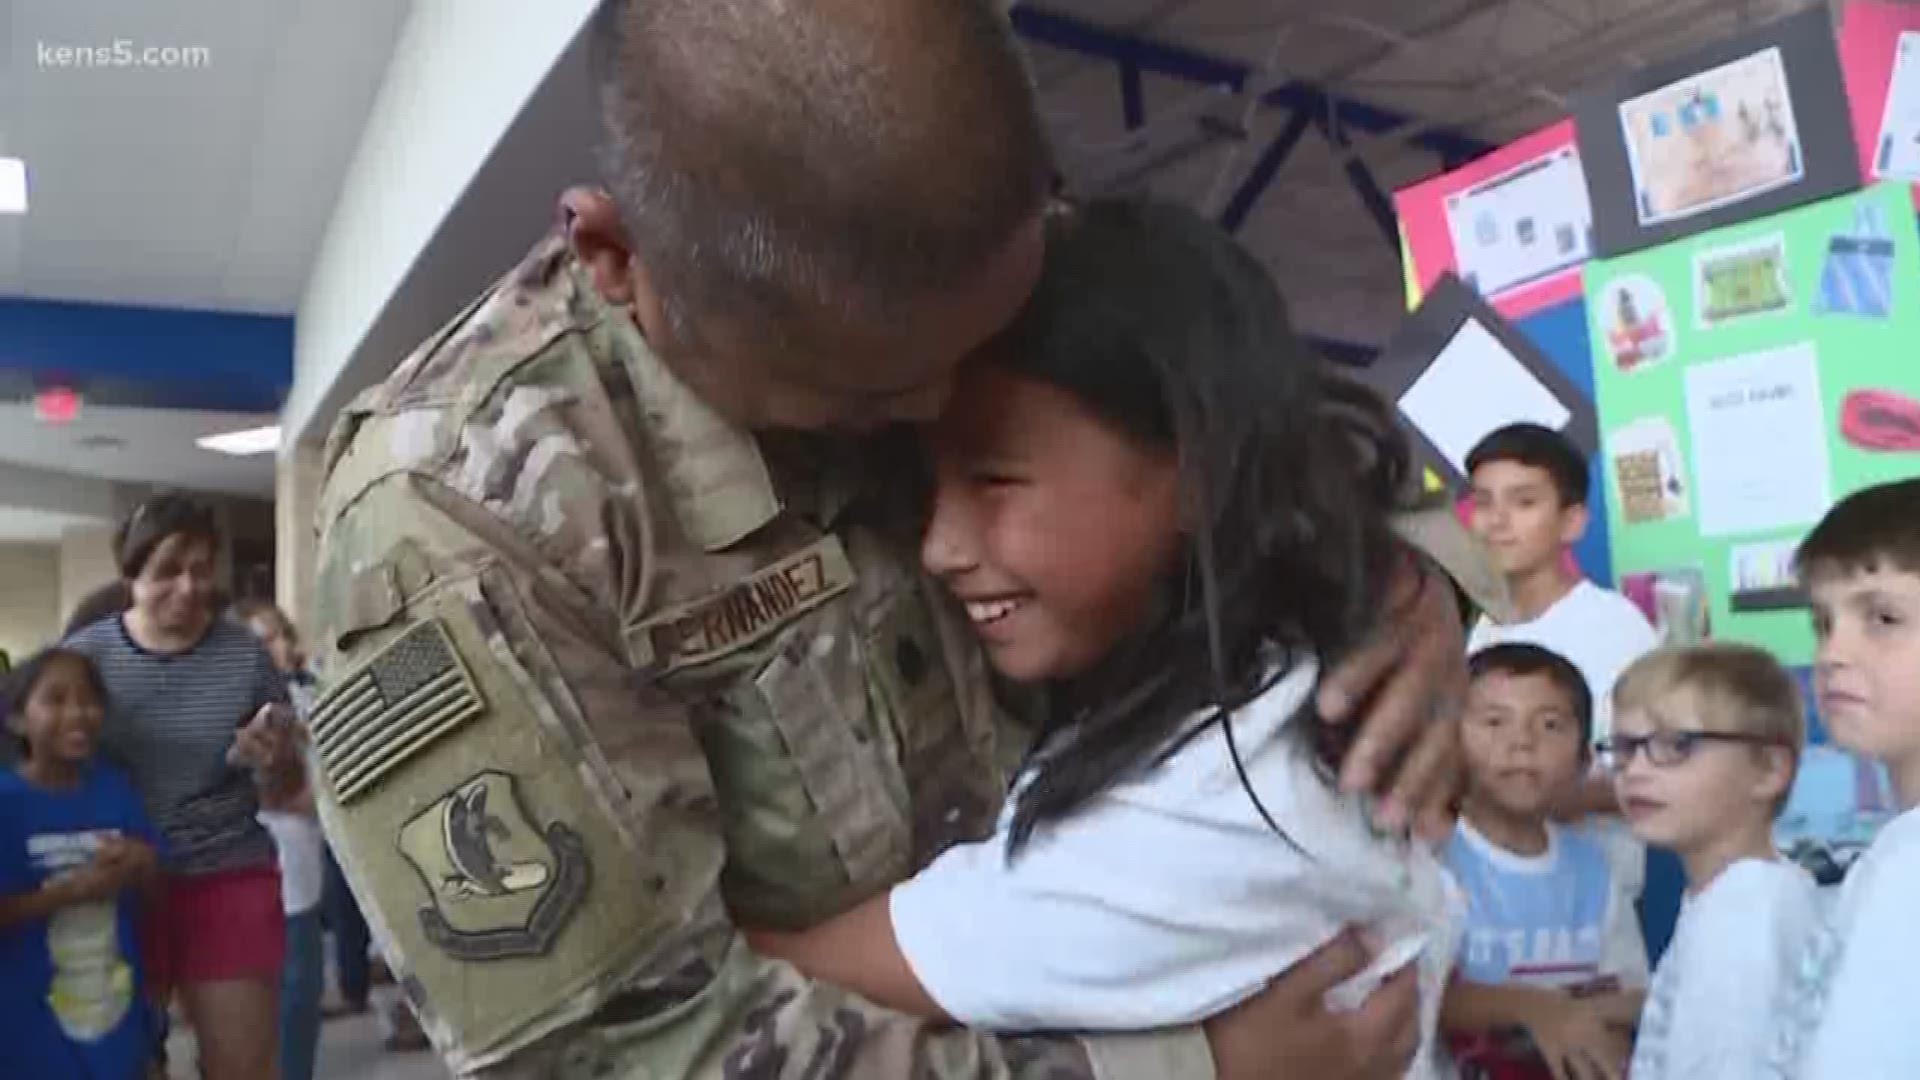 A soldier returned home to San Antonio after spending seven months in Afghanistan. He surprised his daughter during school on Thursday.